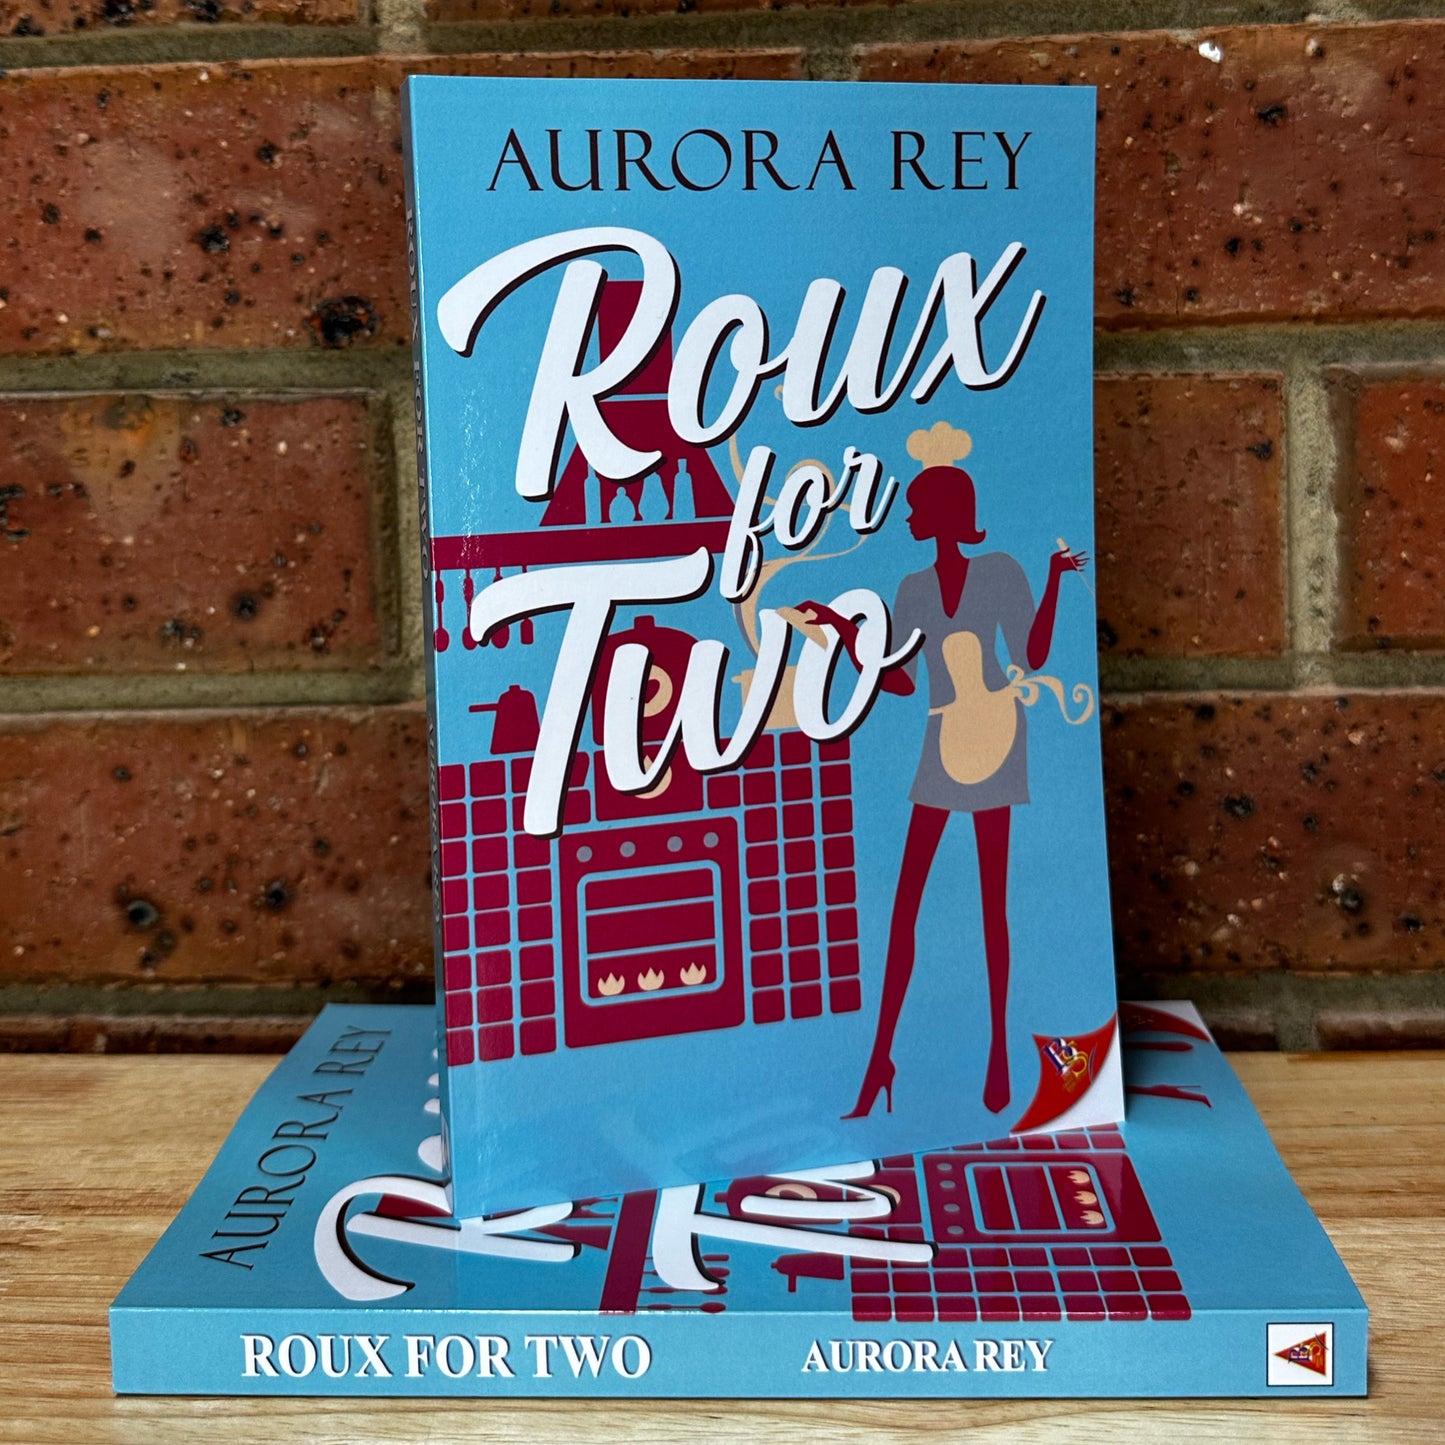 Roux for Two by Aurora Rey